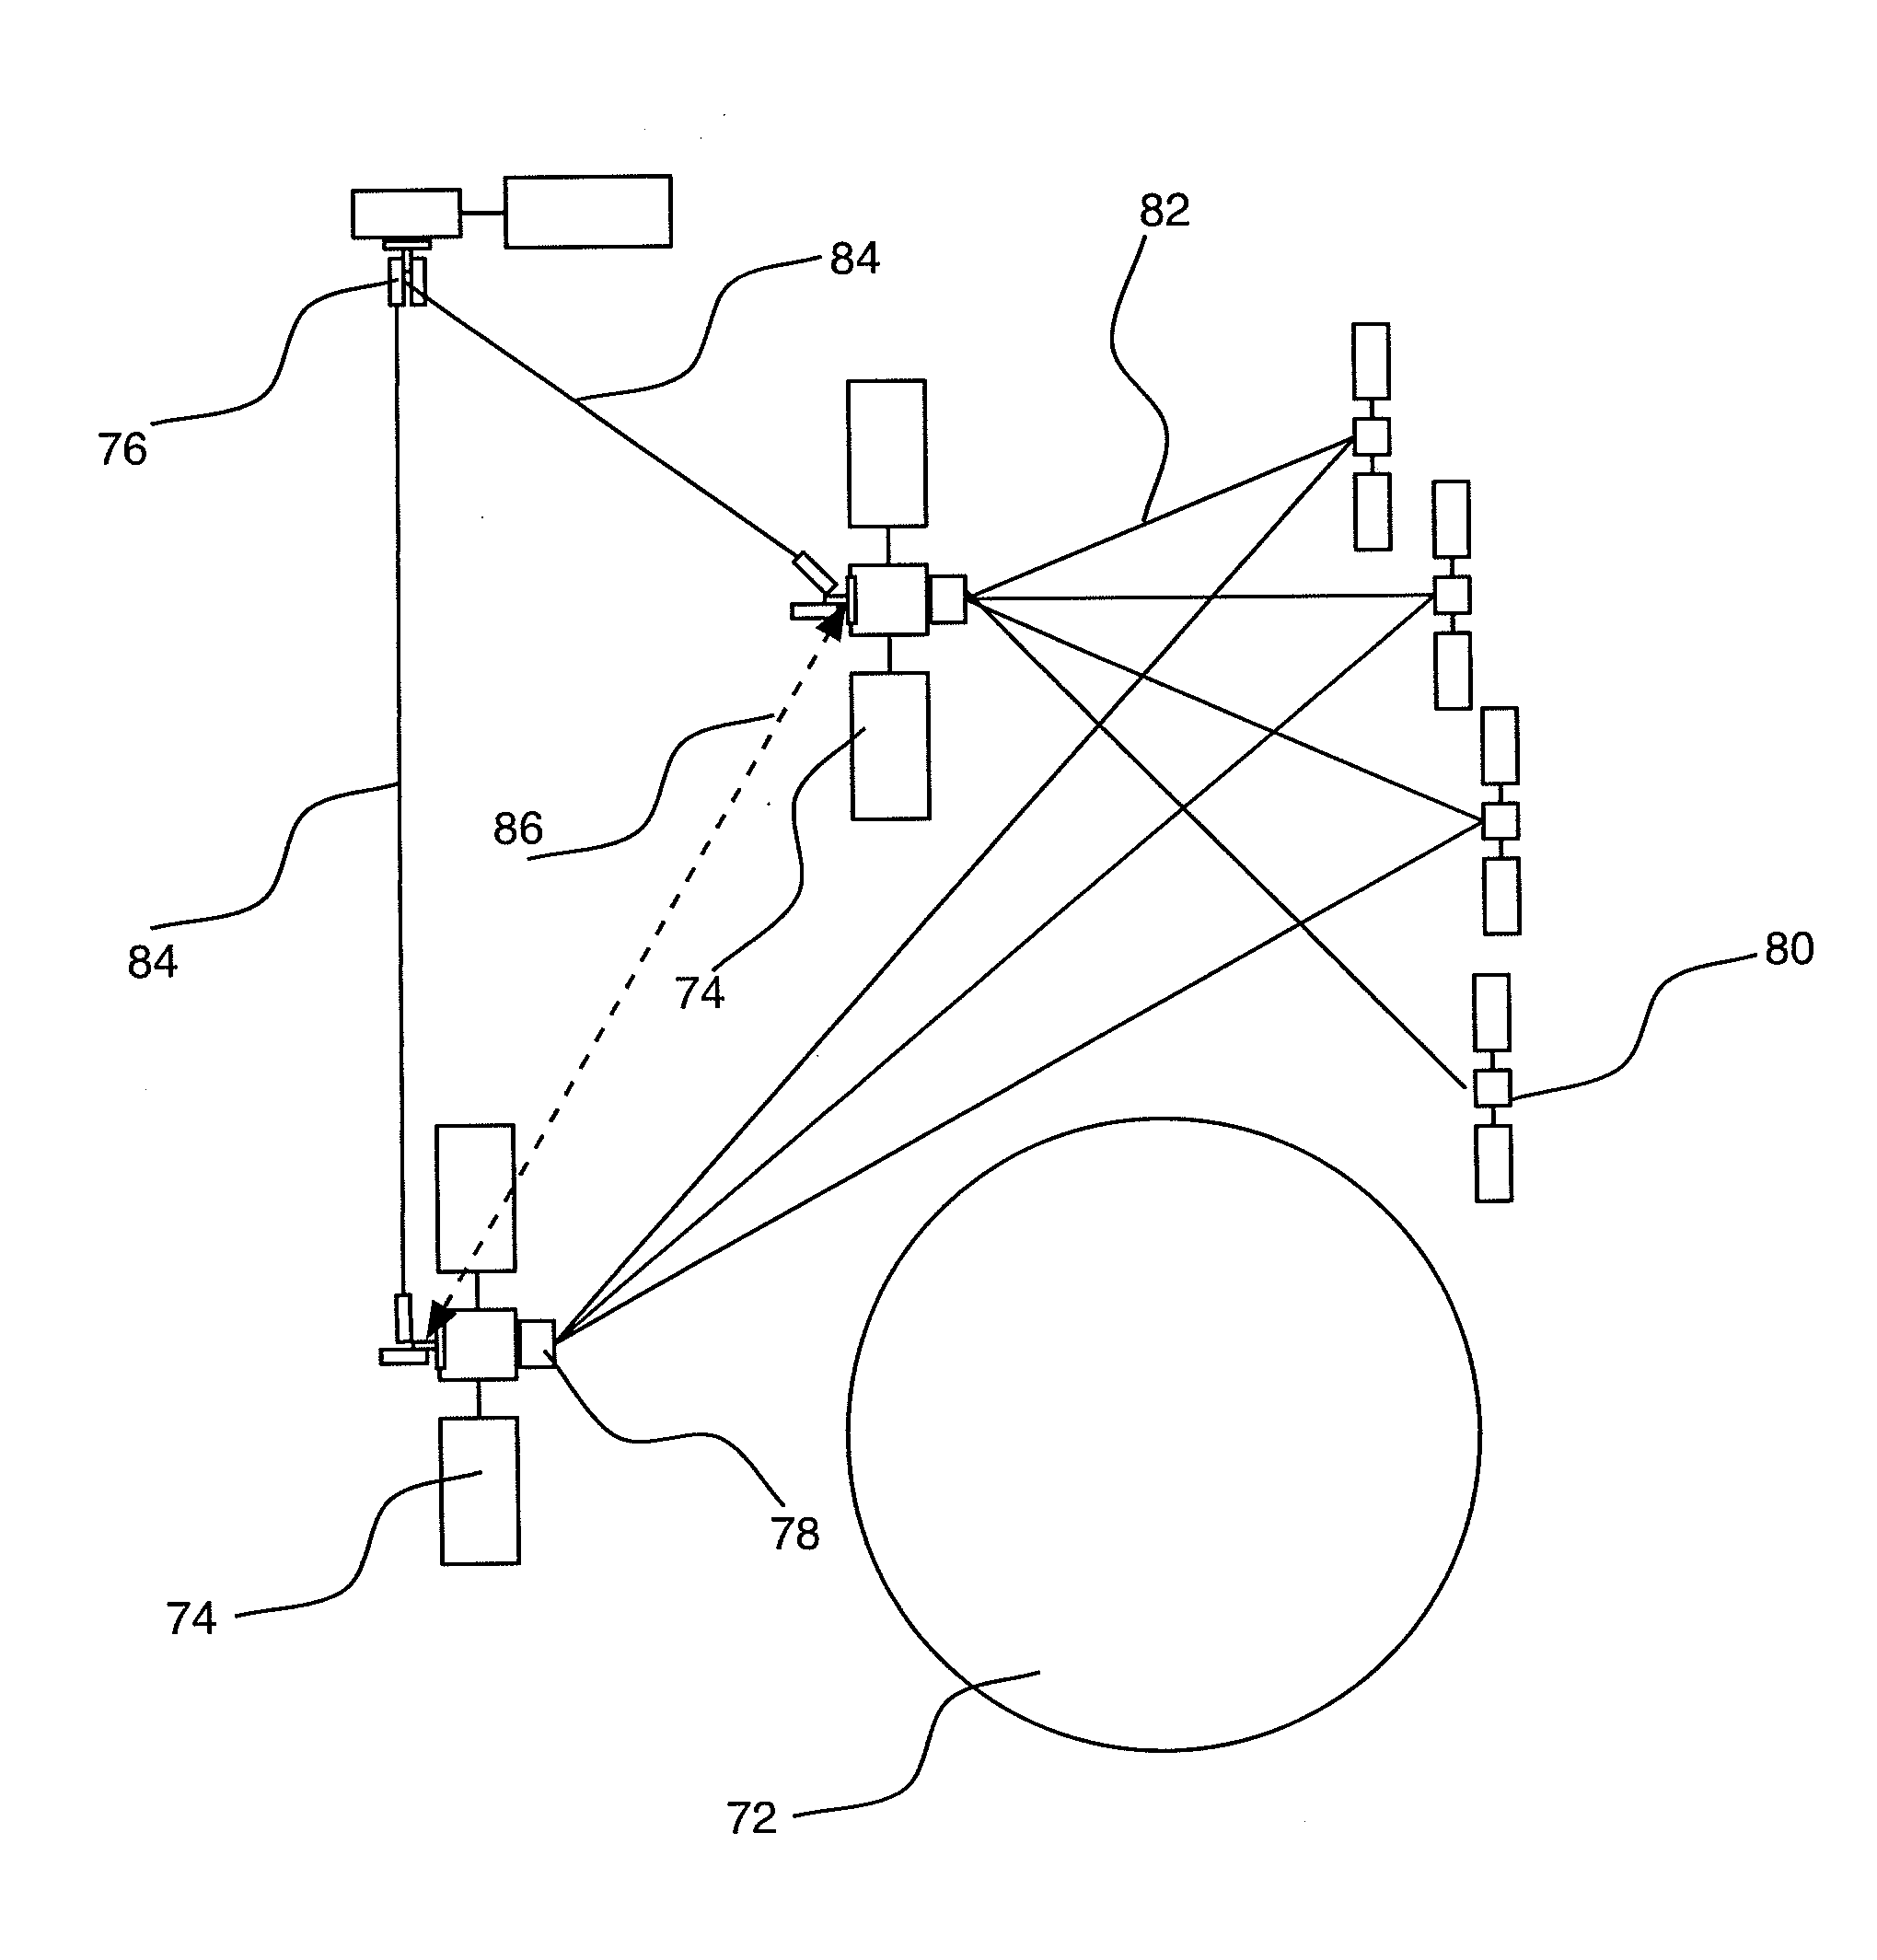 Optical navigation attitude determination and communications system for space vehicles